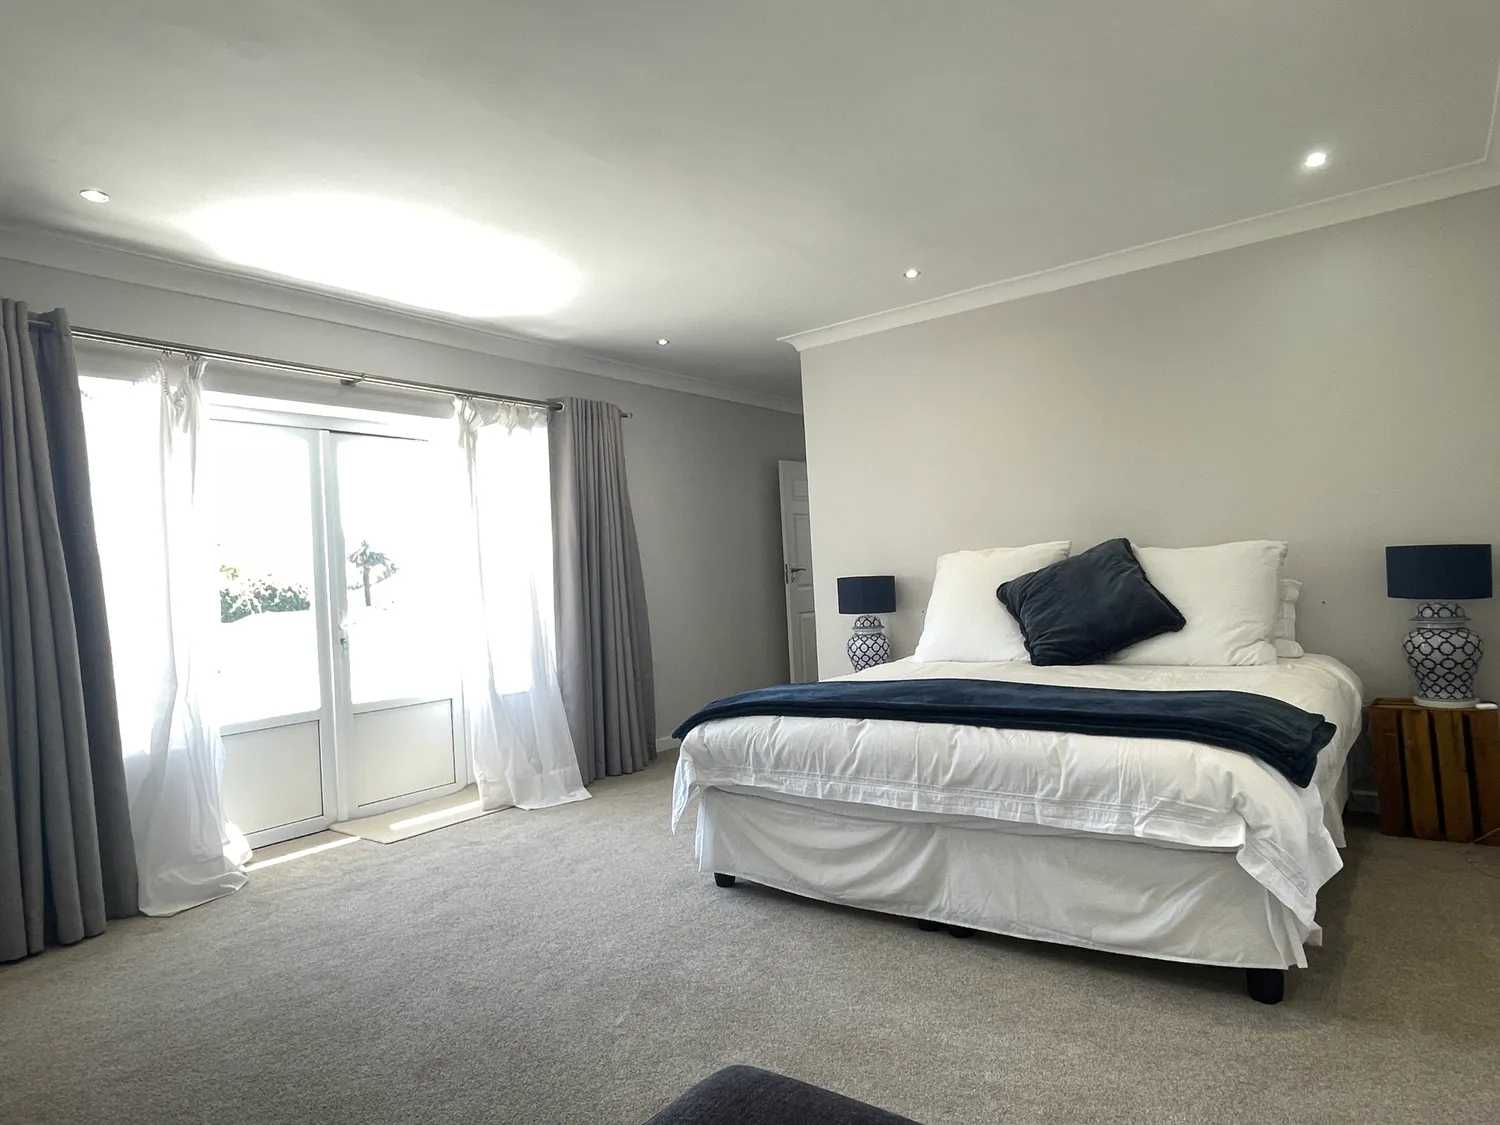 House in Cape Town, 21 Upper Noreen Avenue 11415400